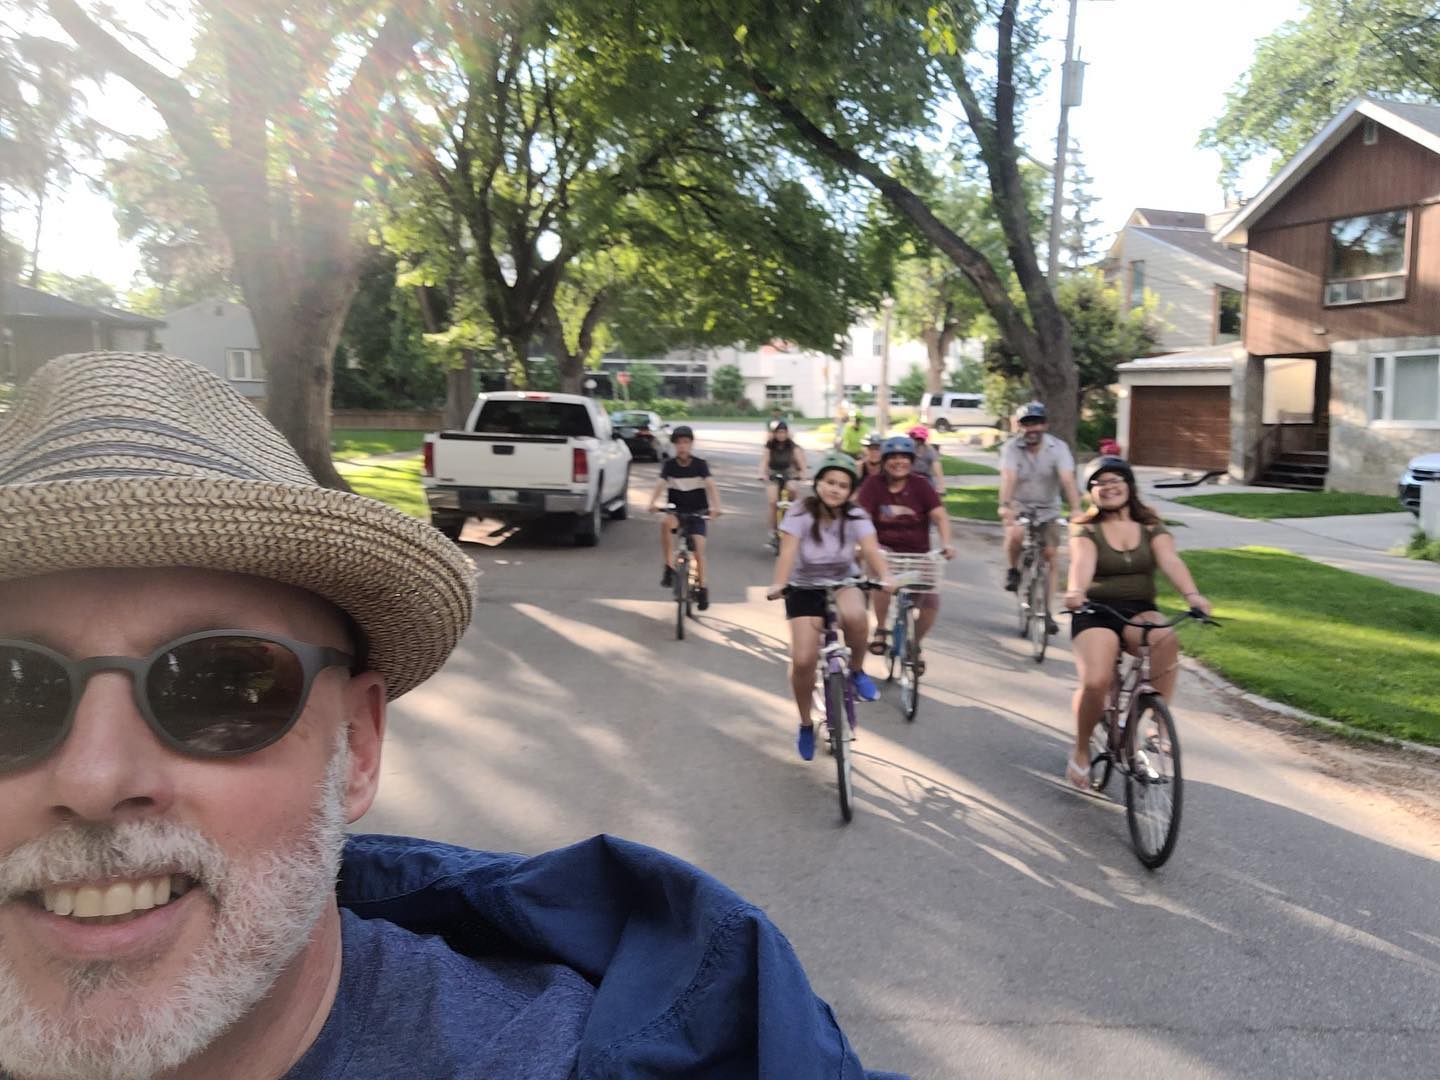 A group of people ride bicycles down a residential street. The person taking the selfie is in the foreground, wearing a straw hat and sunglasses, smiling at the camera. Behind them, several cyclists of various ages are riding in a line, enjoying the ride. The street is lined with trees, and there are houses and parked vehicles visible along the sides. The atmosphere appears to be casual and friendly, with everyone seemingly enjoying a group bike ride on a sunny day.